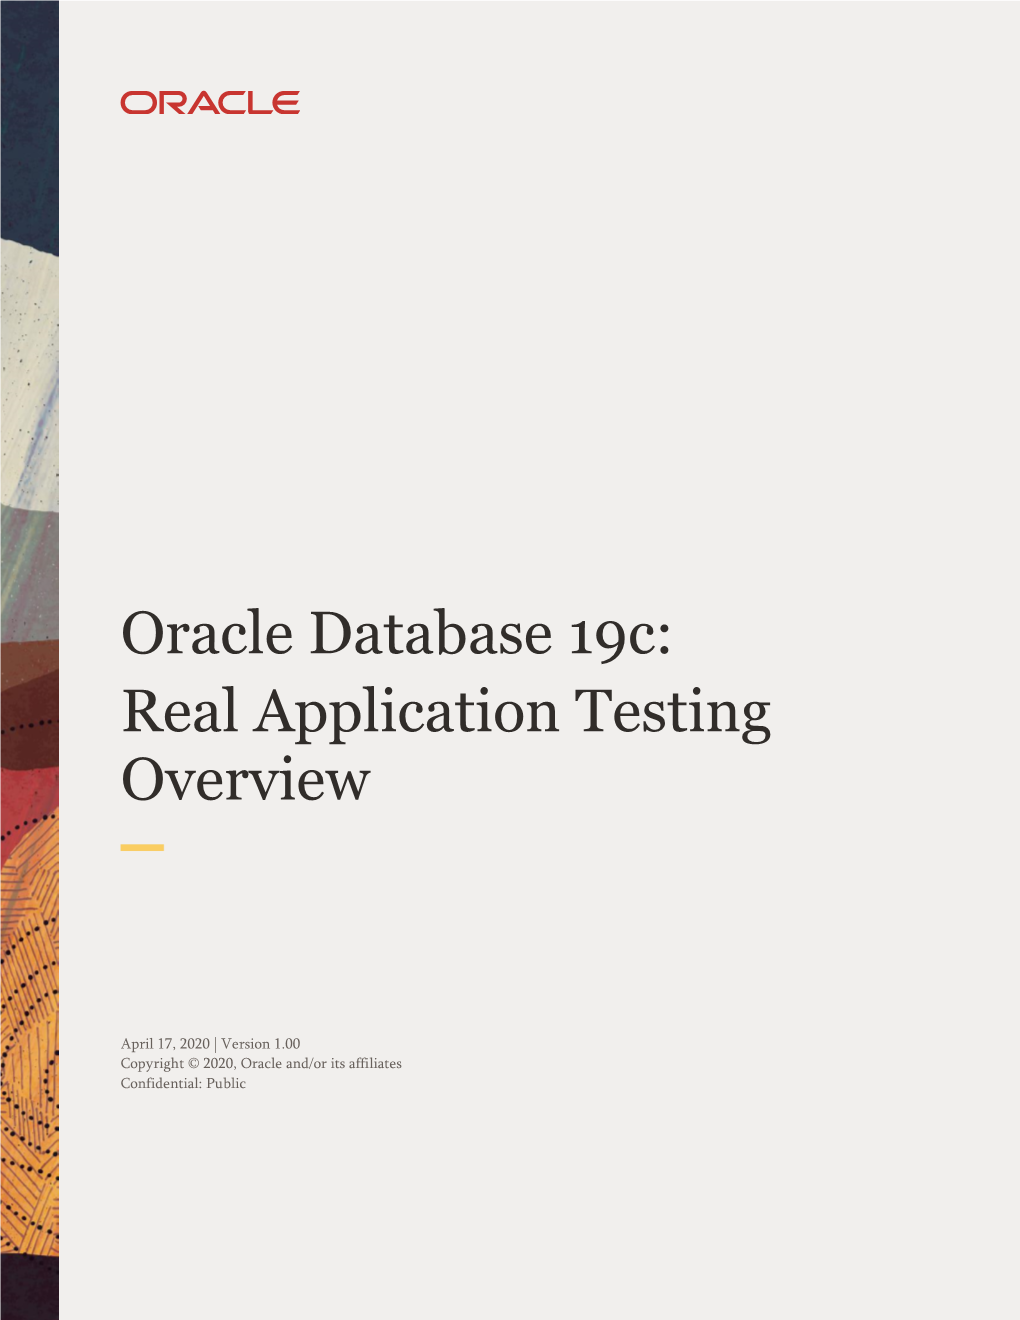 Oracle Database 19C: Real Application Testing Overview